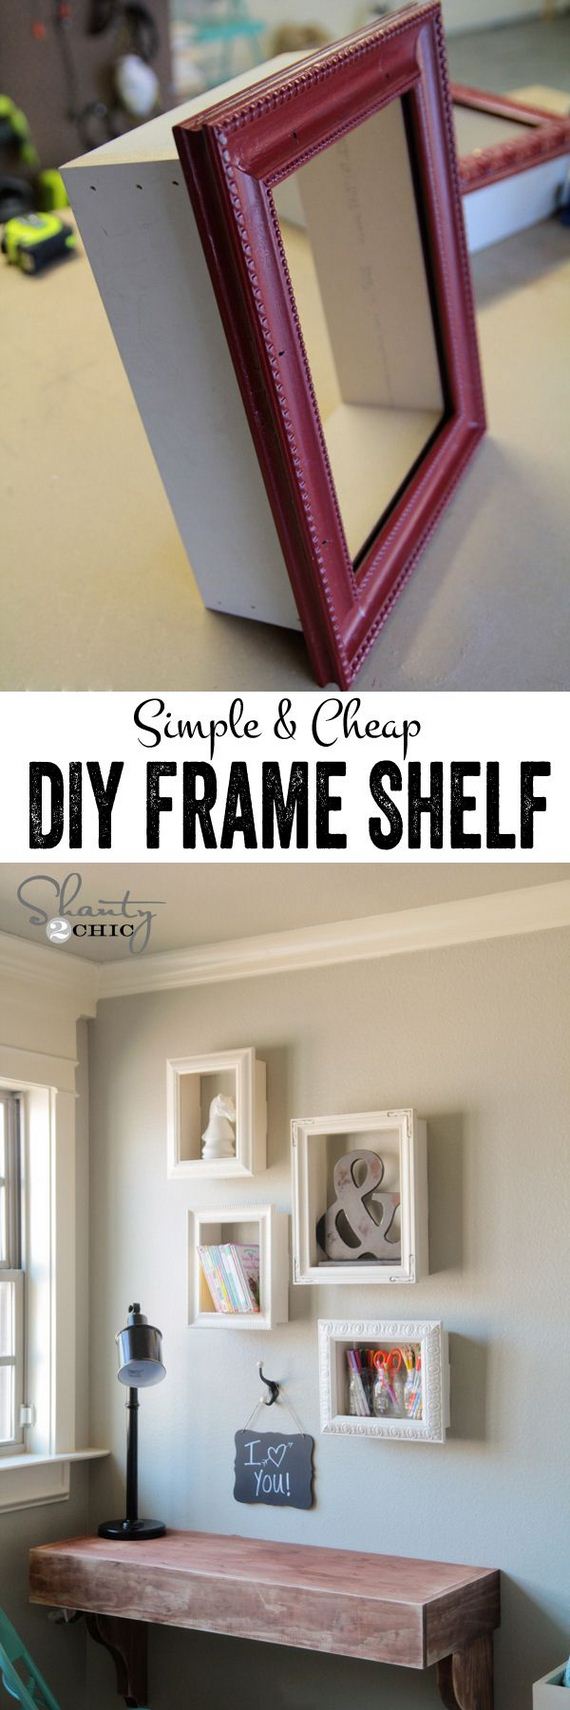 14-cheap-awesome-diy-home